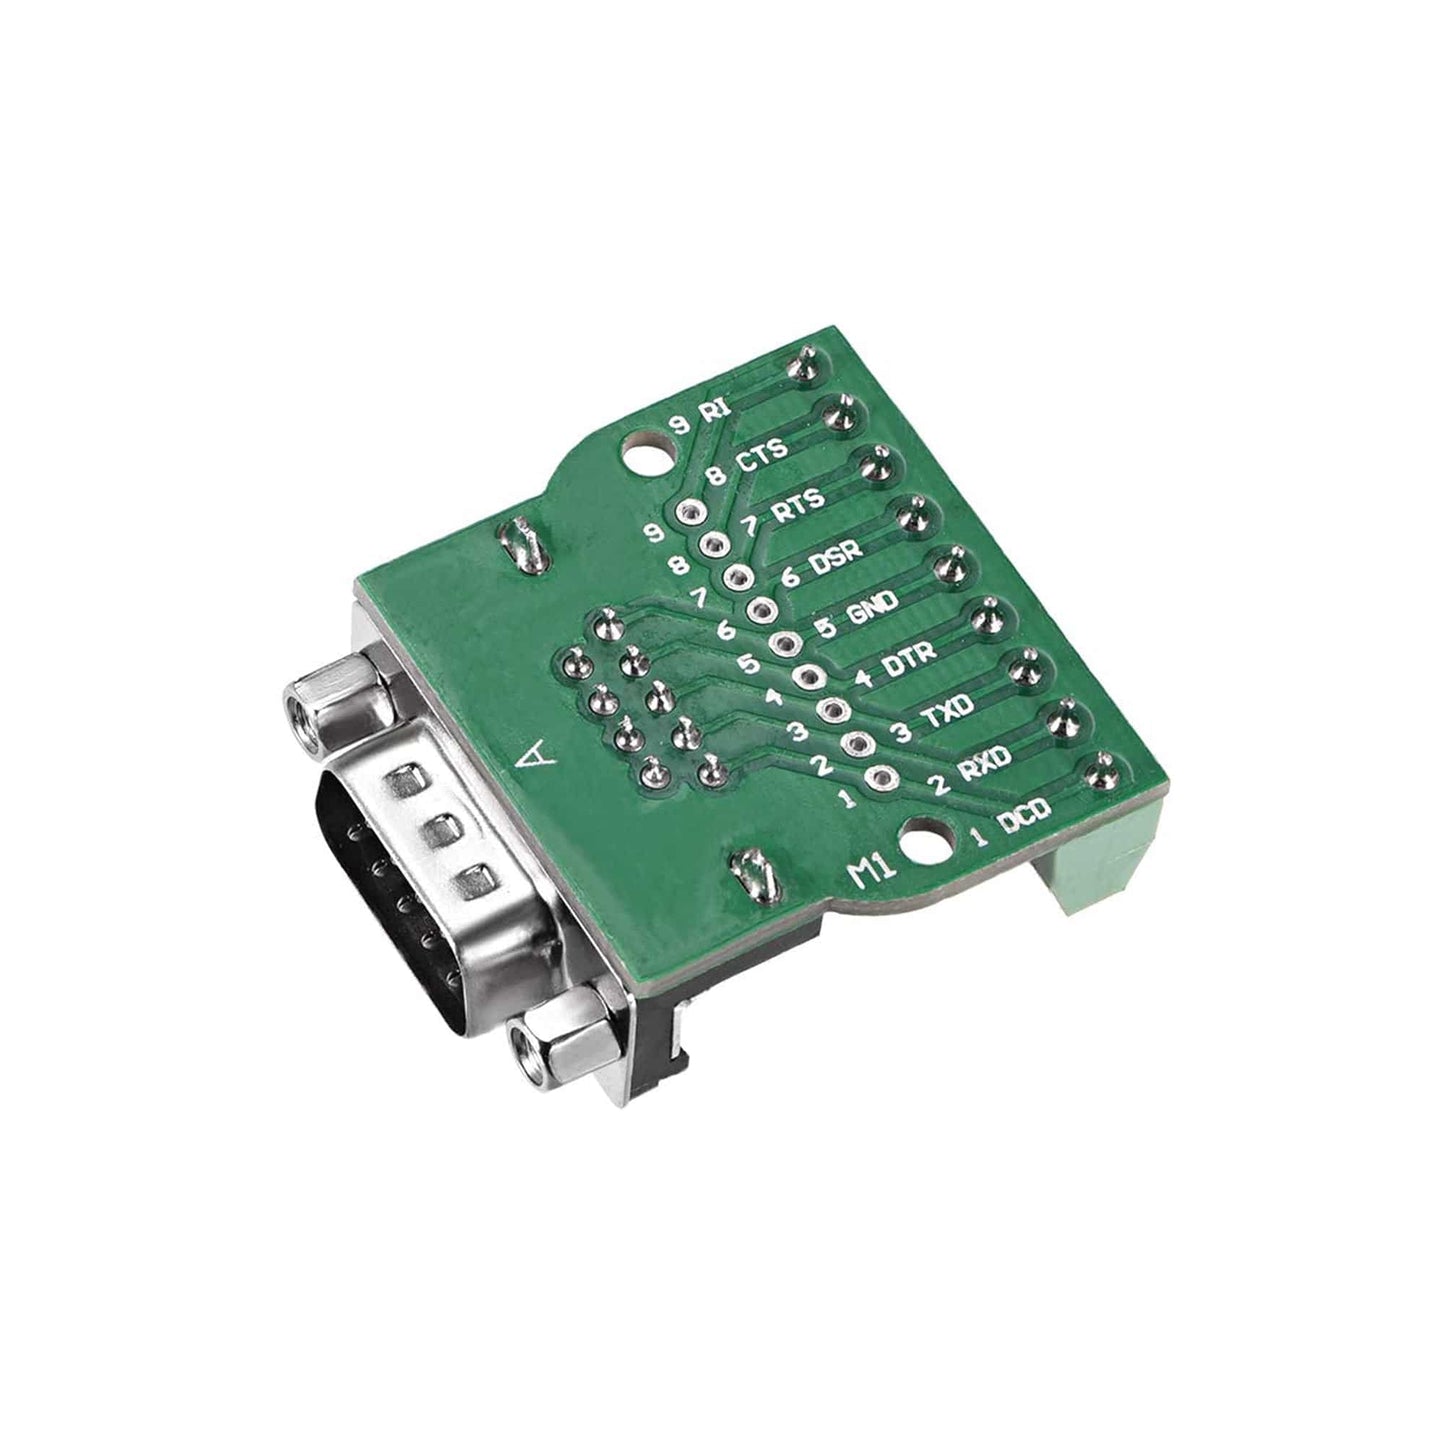 DB9 to RS232 RS485 Converter Board